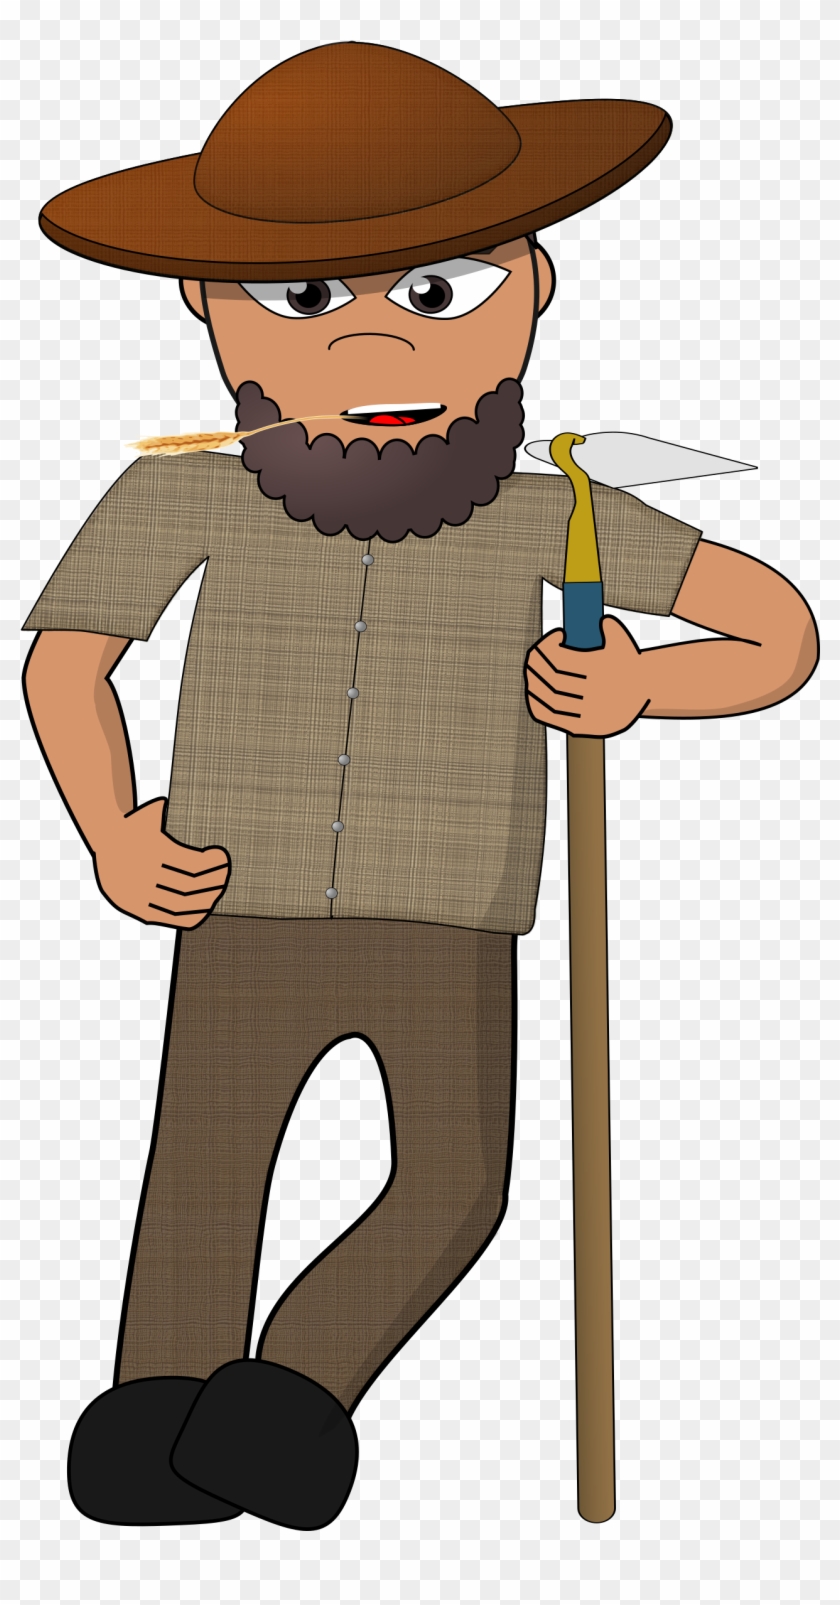 This Free Icons Png Design Of Farmer Past - Farmer Transparent Clipart #5526353